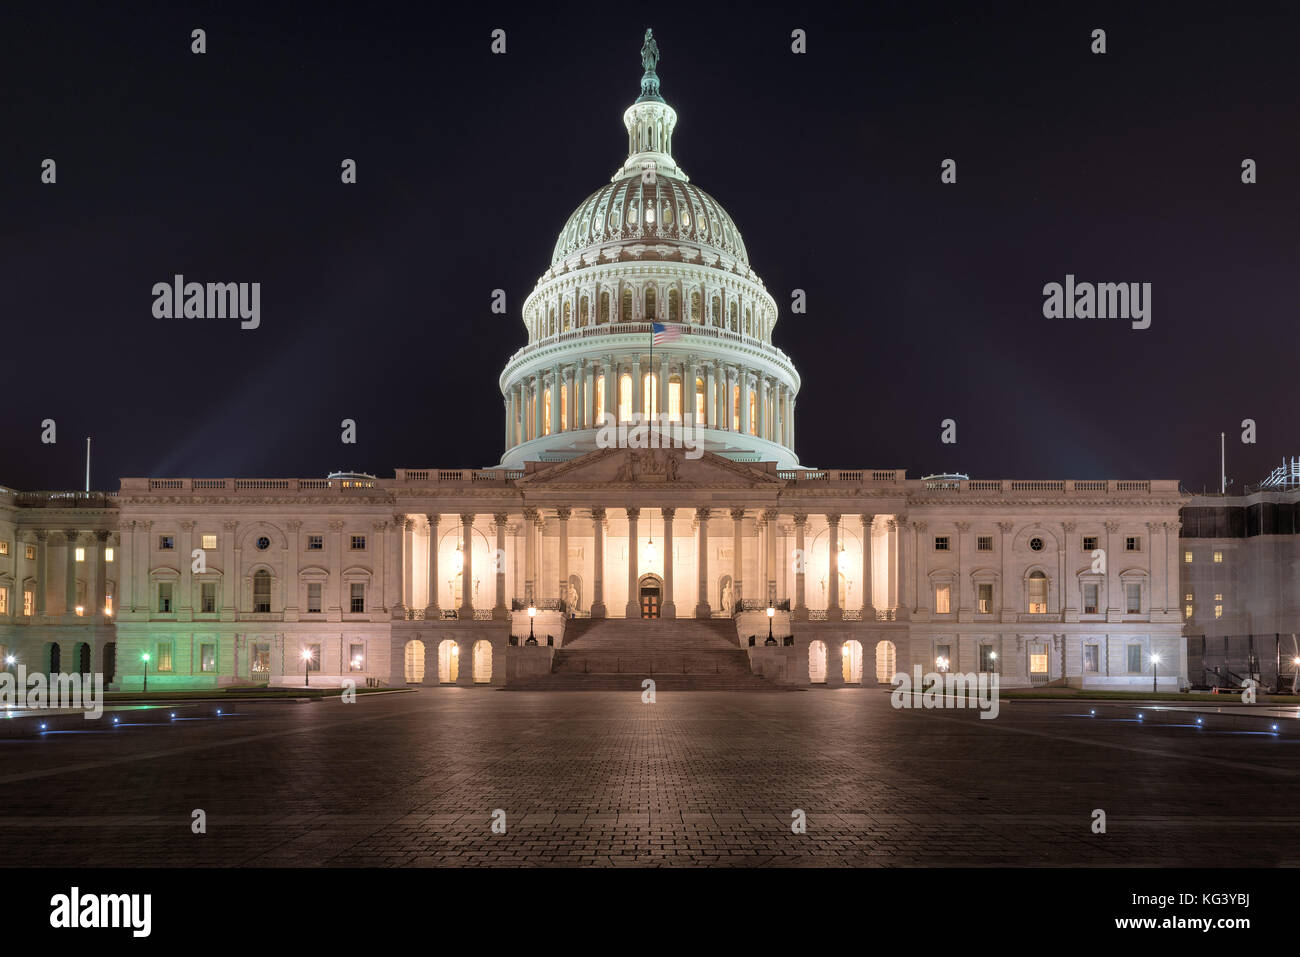 Us Capitol building at night - washington dc, united states Banque D'Images